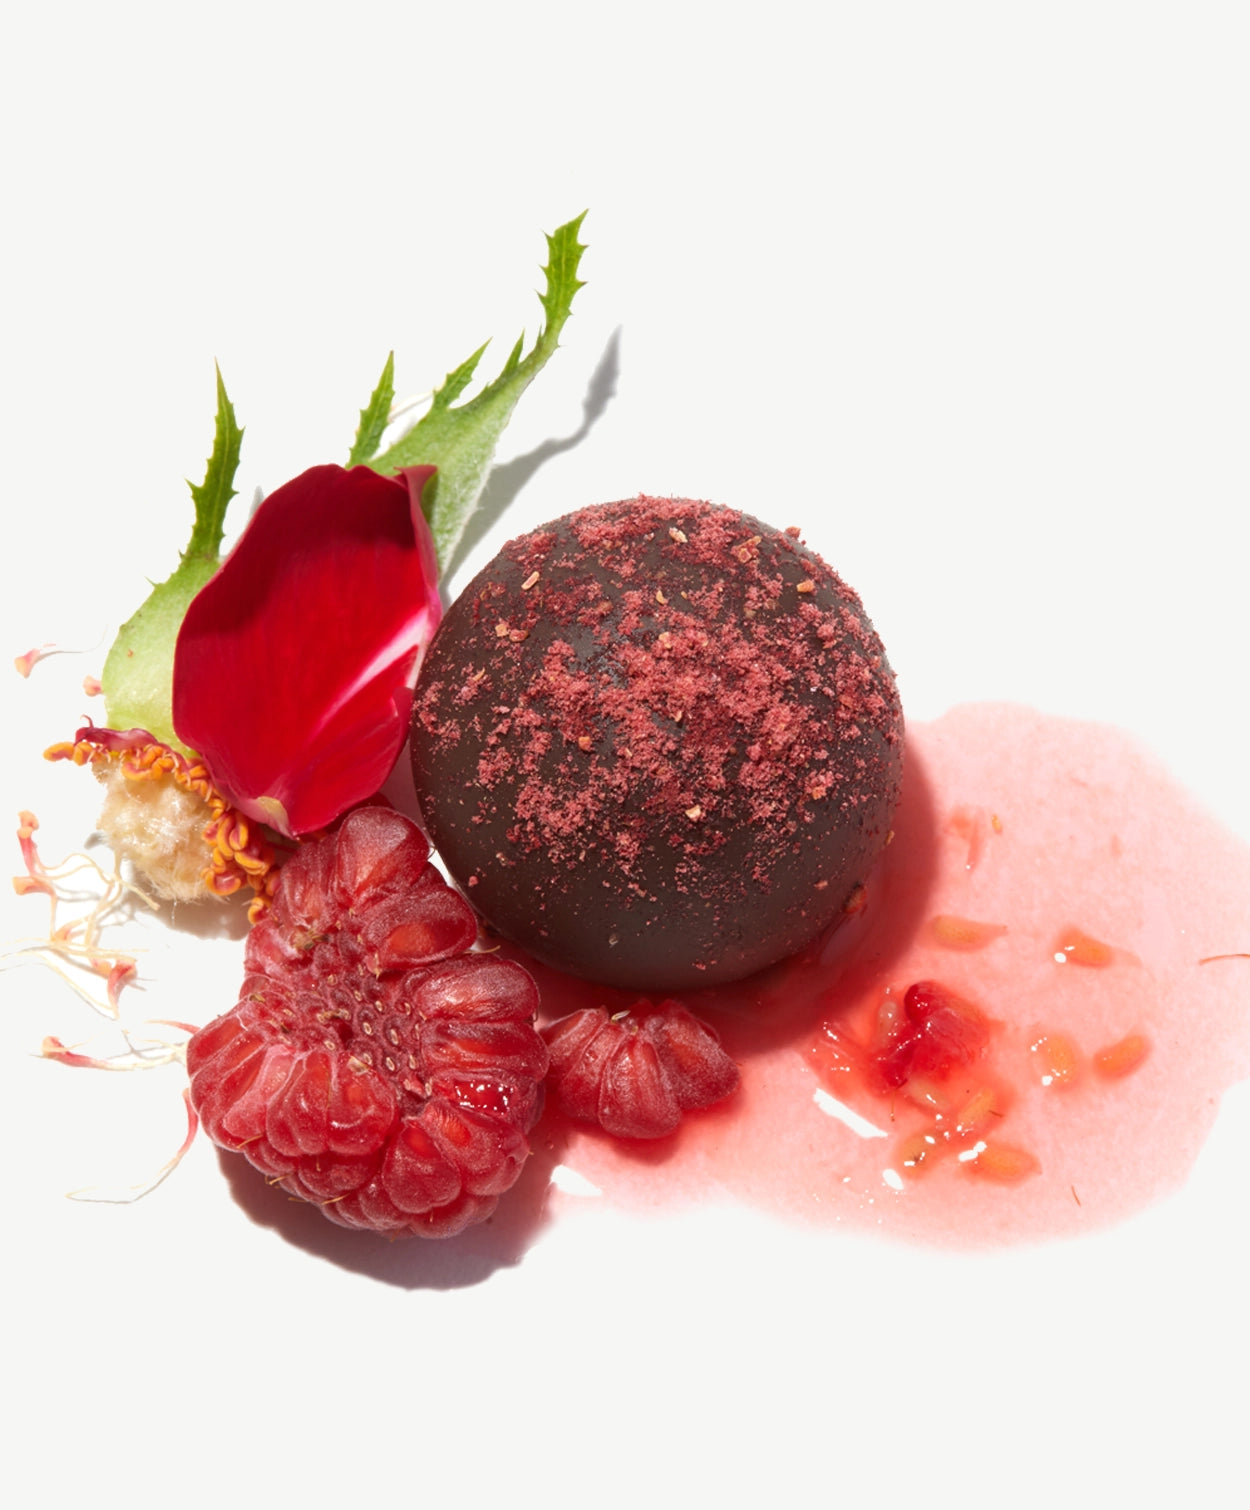 Close-up view of a Vosges vegan chocolate truffle topped with dried raspberries beside a fresh raspberry and flower petals on a white background.